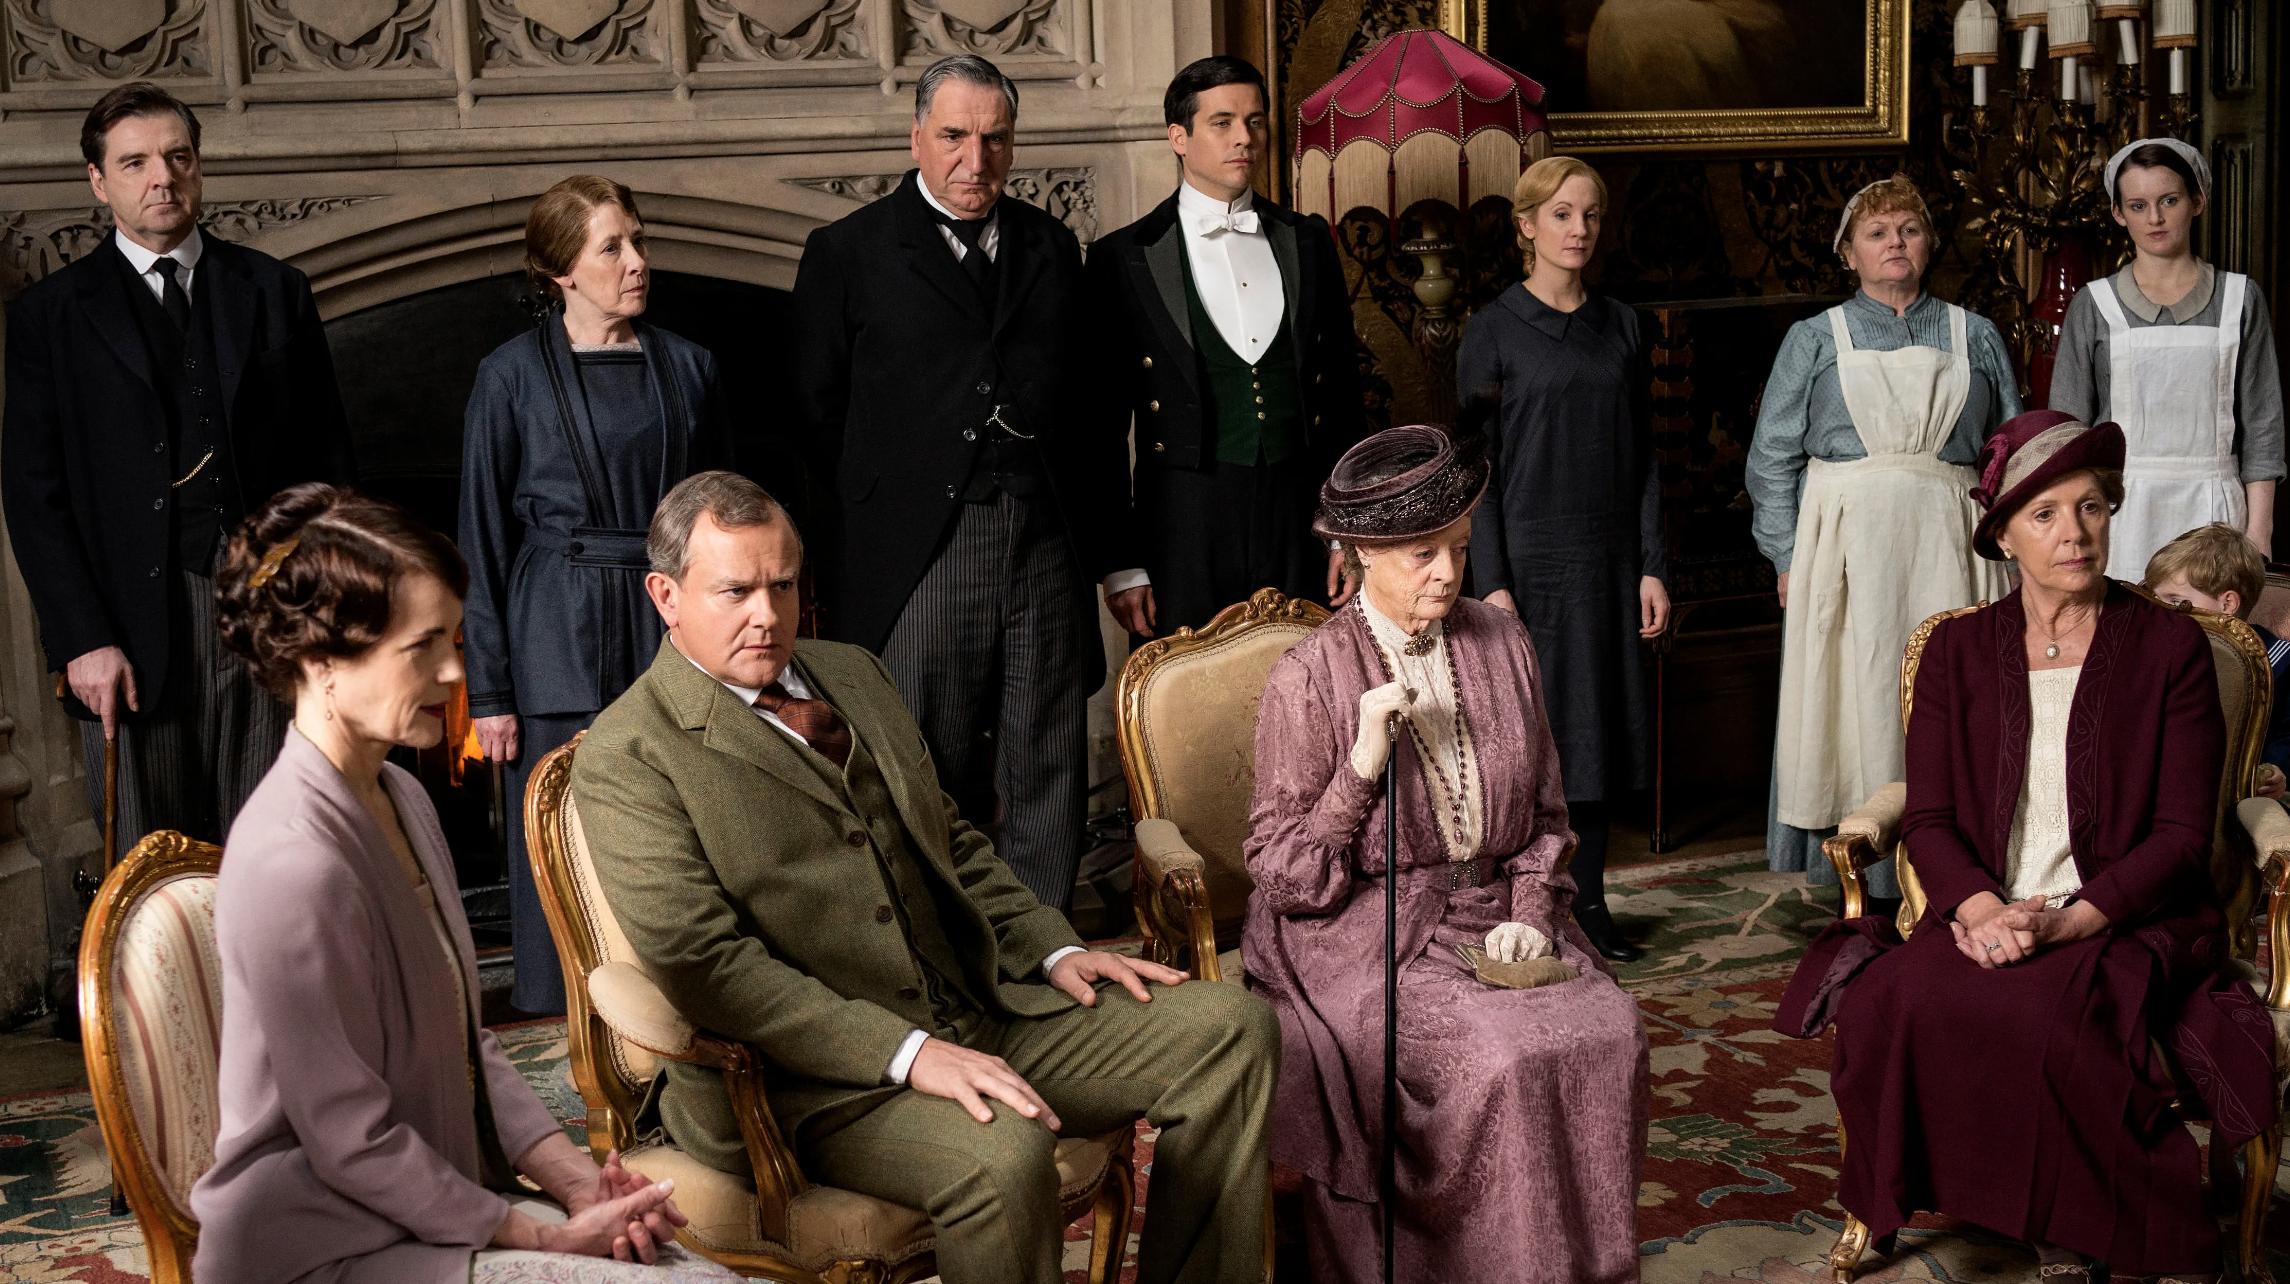 Downton Abbey series available on US Netflix